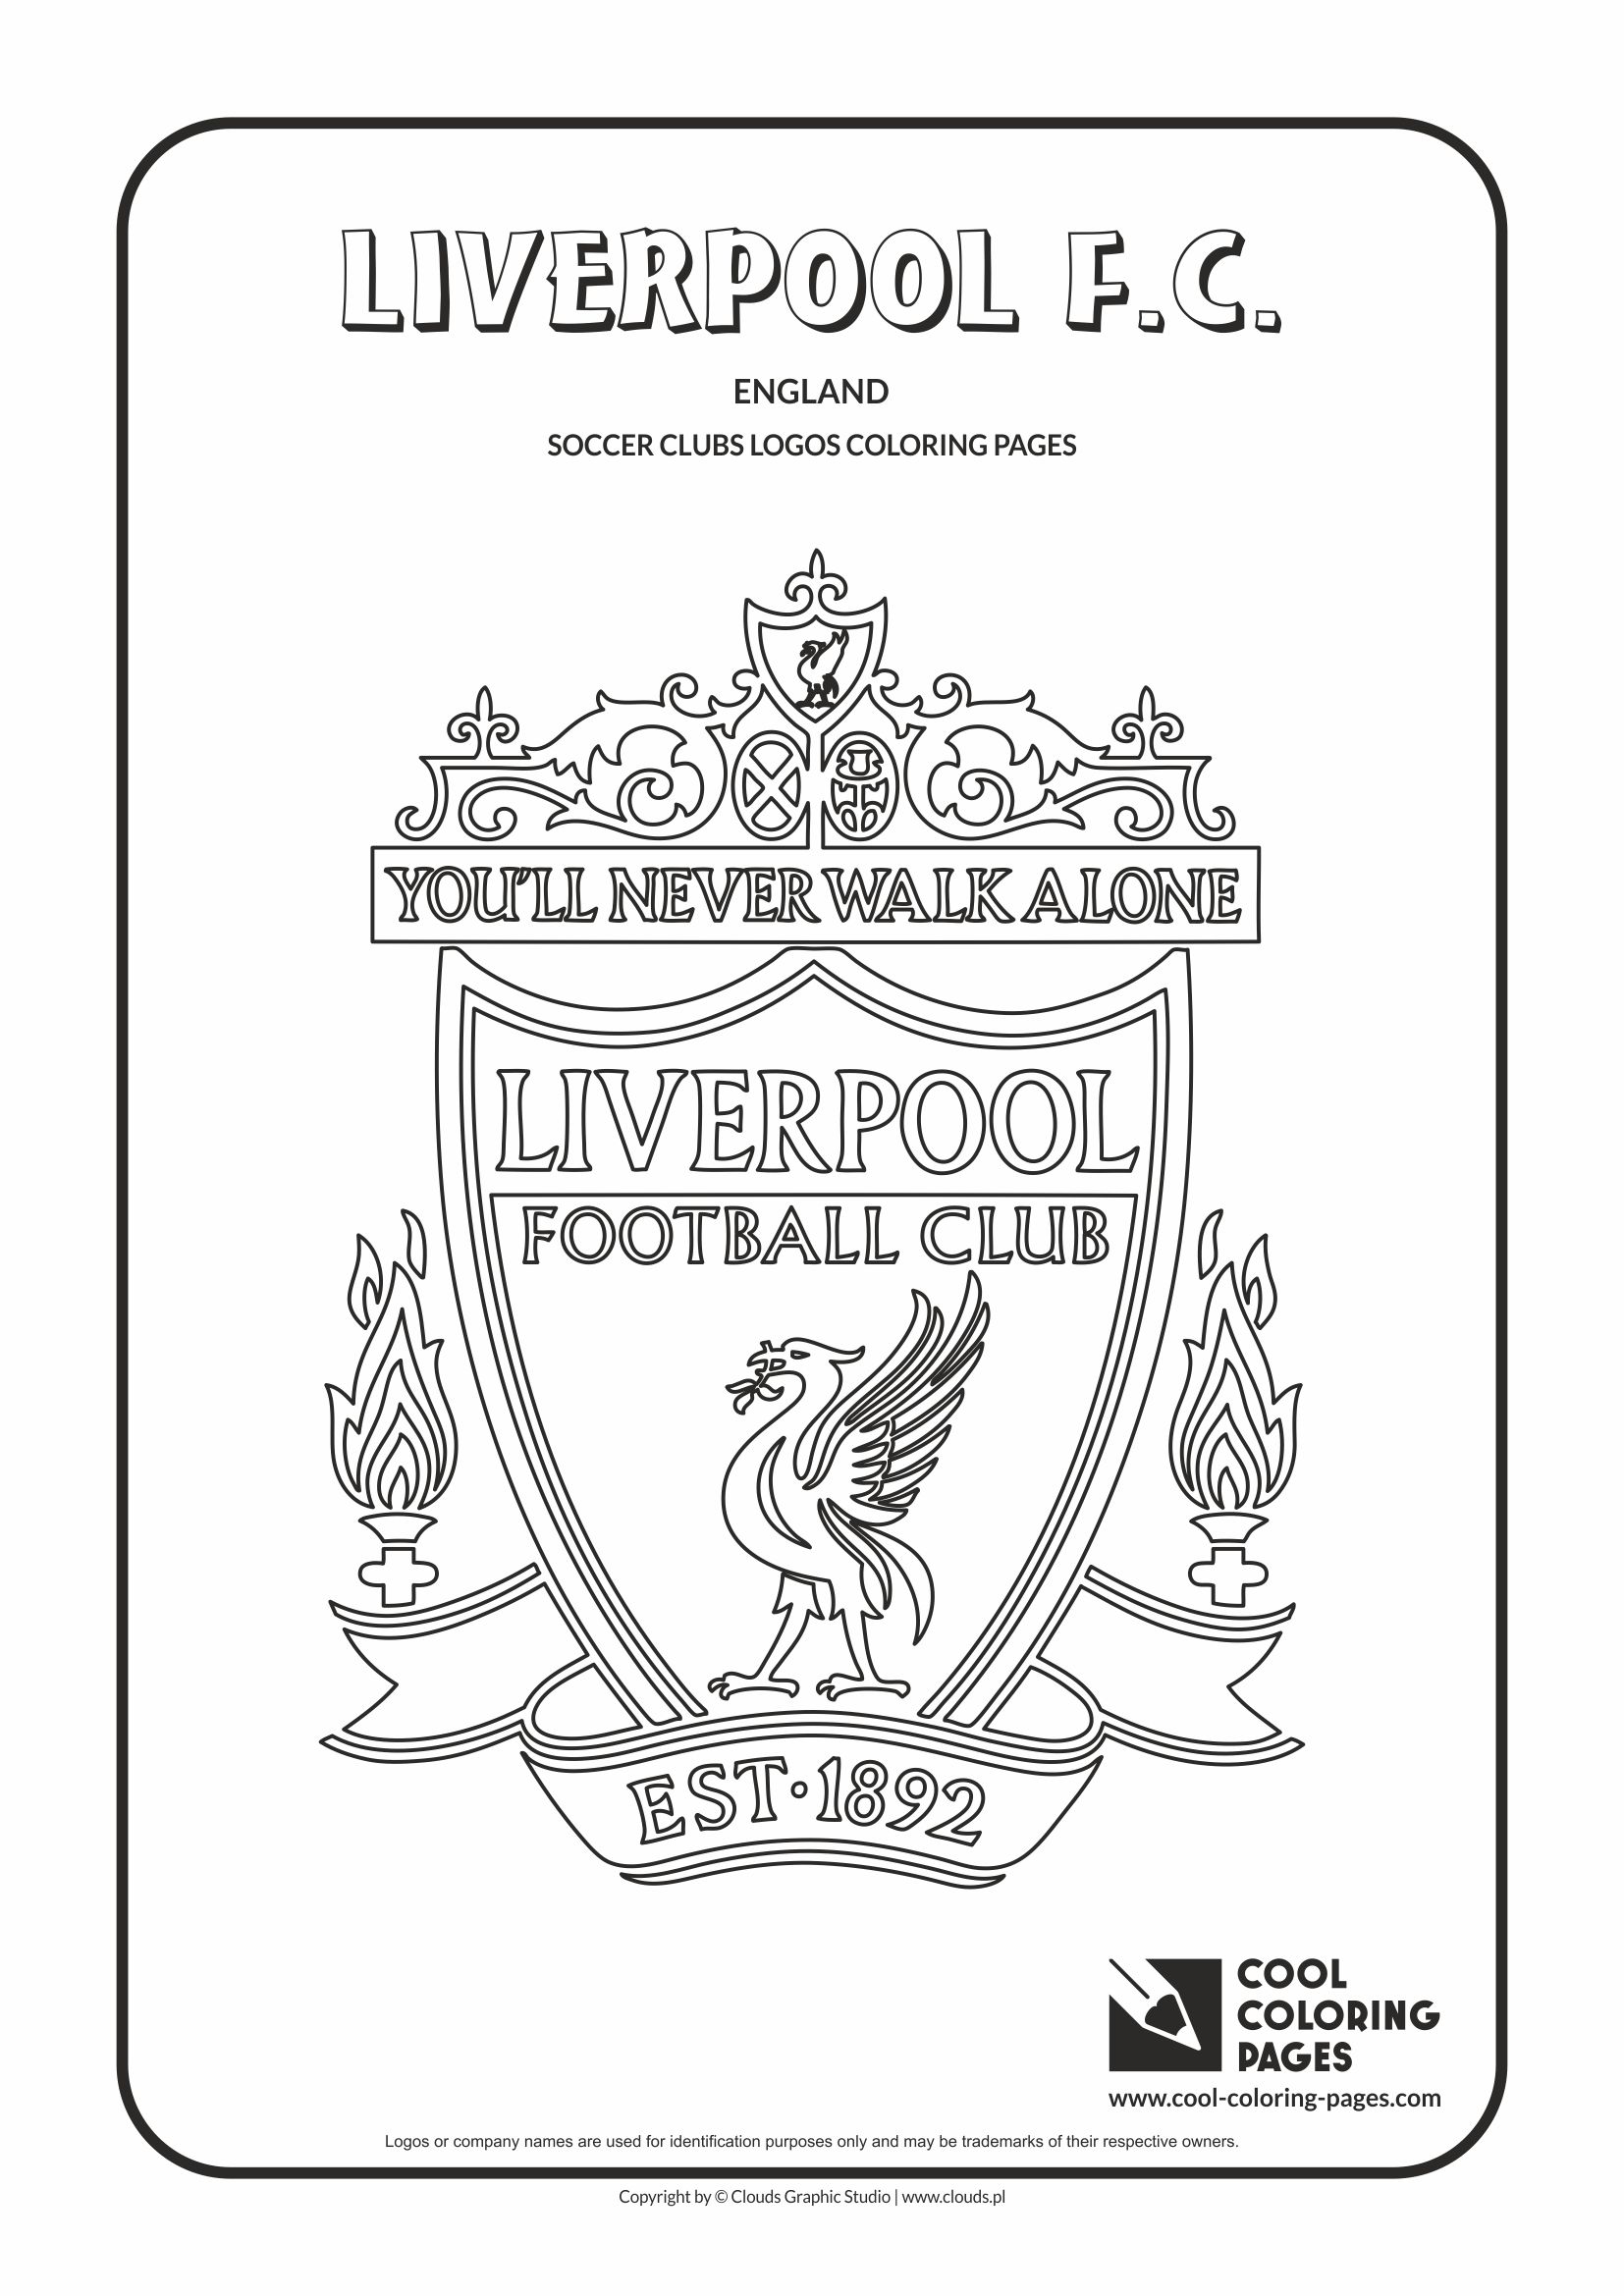 Cool coloring pages liverpool fc logo coloring page